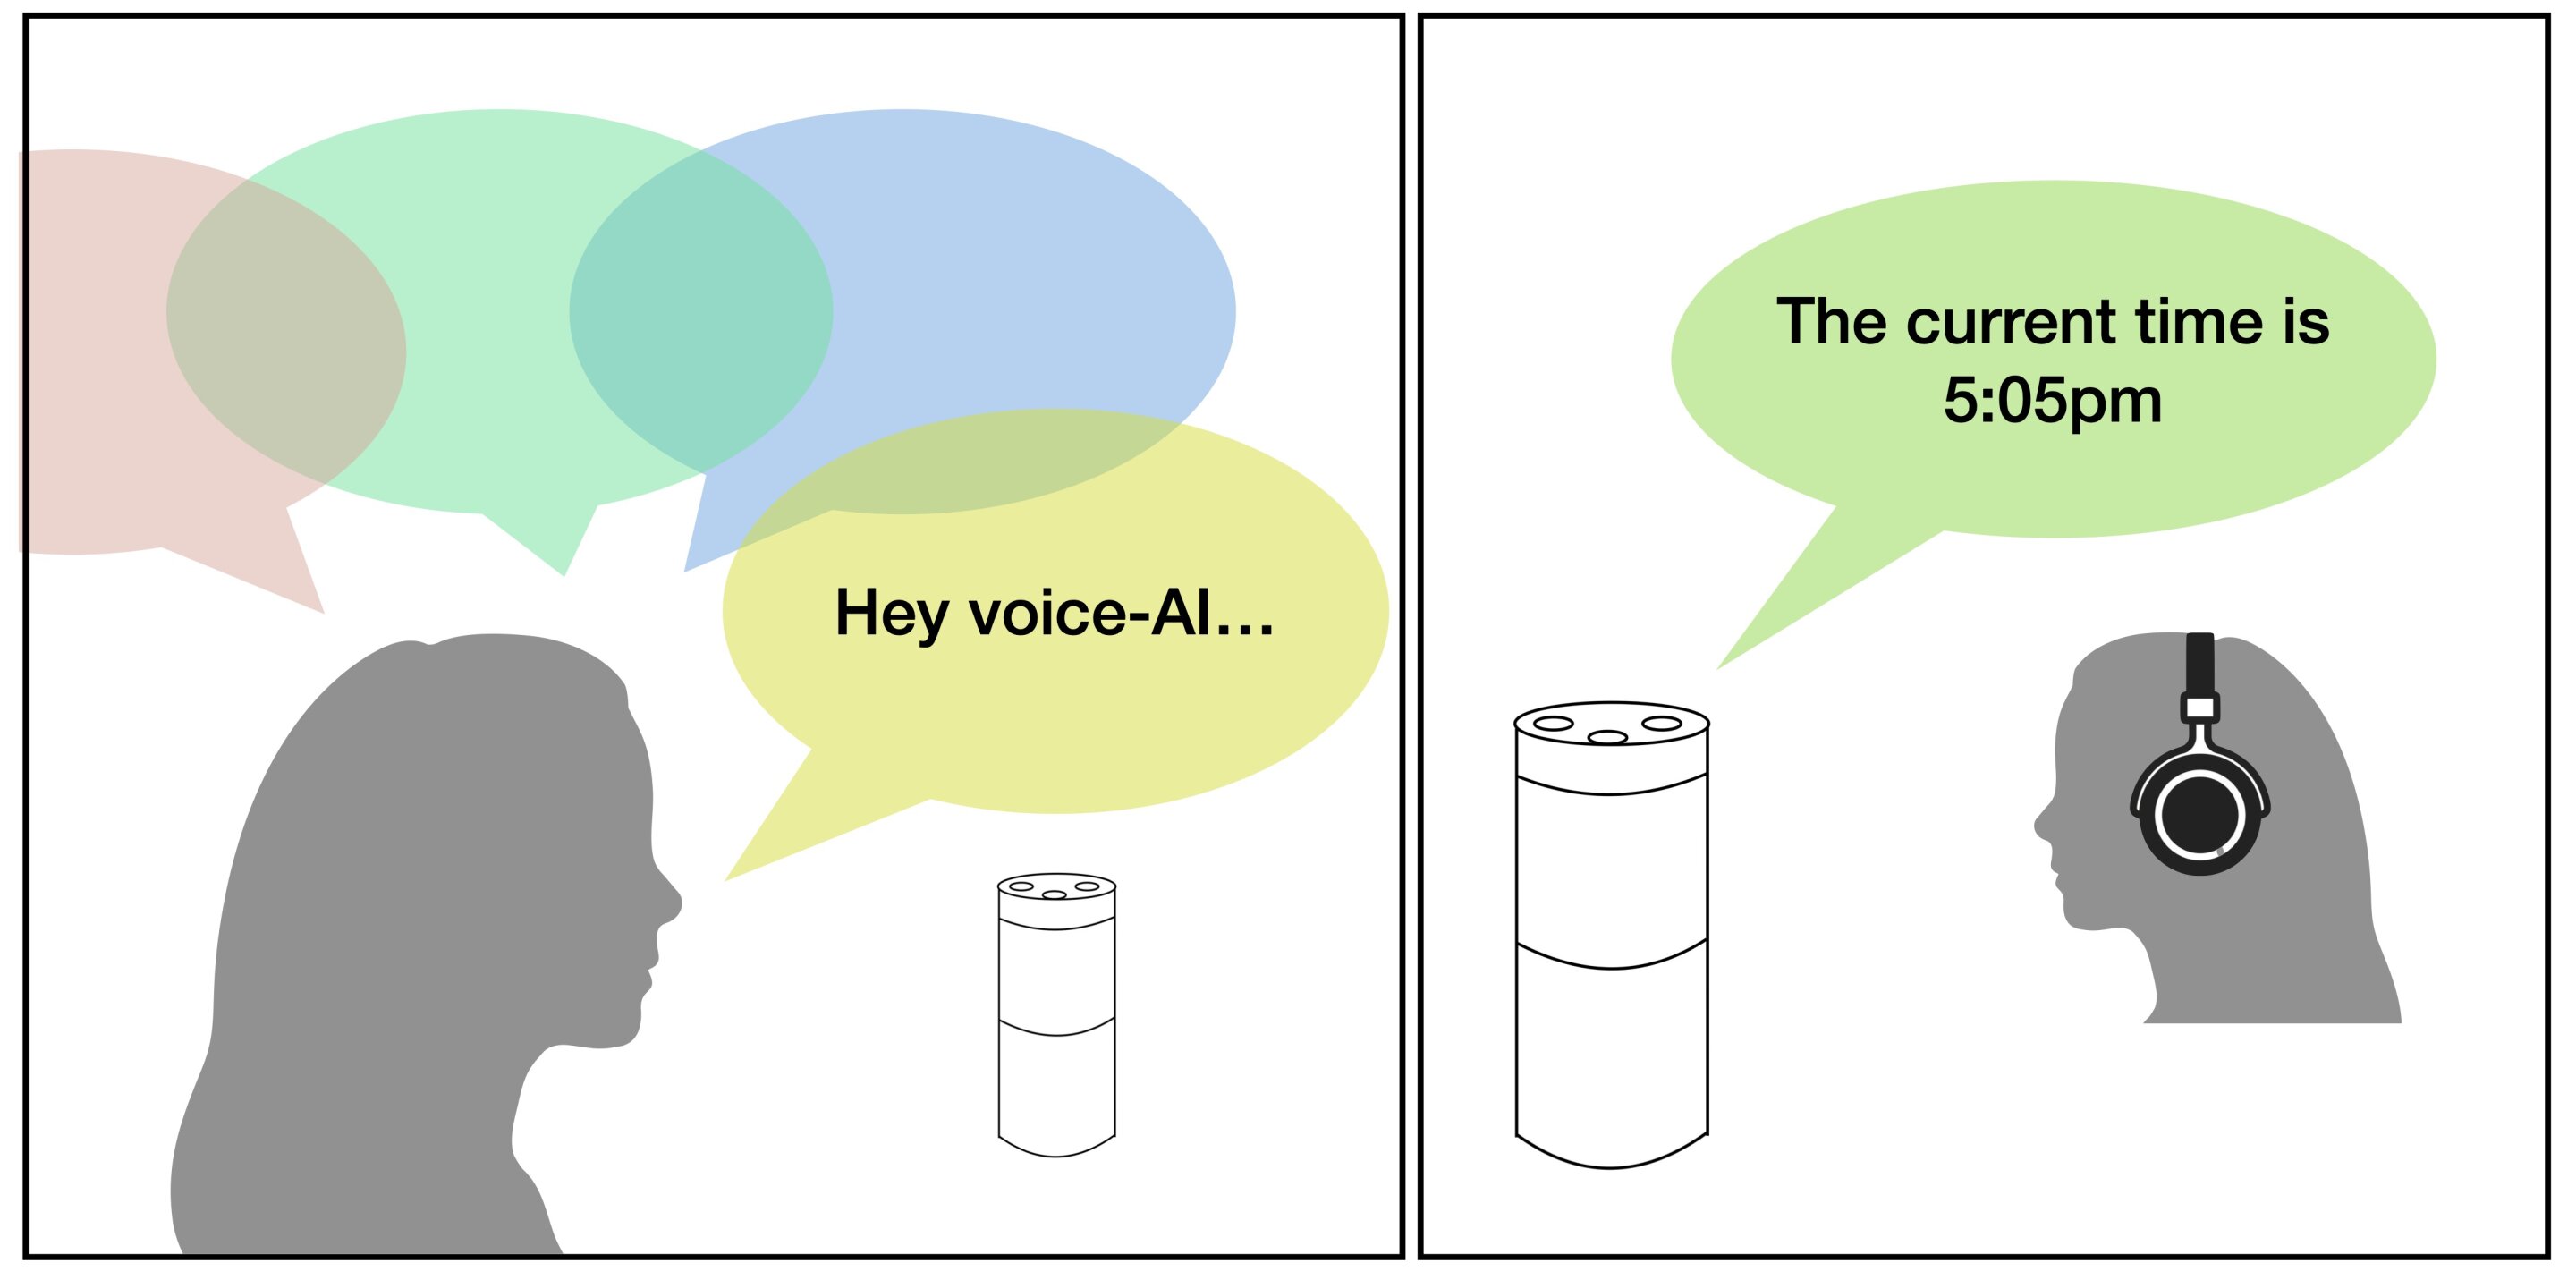 Clear speech in the new digital era: Speaking and listening clearly to voice-AI systems